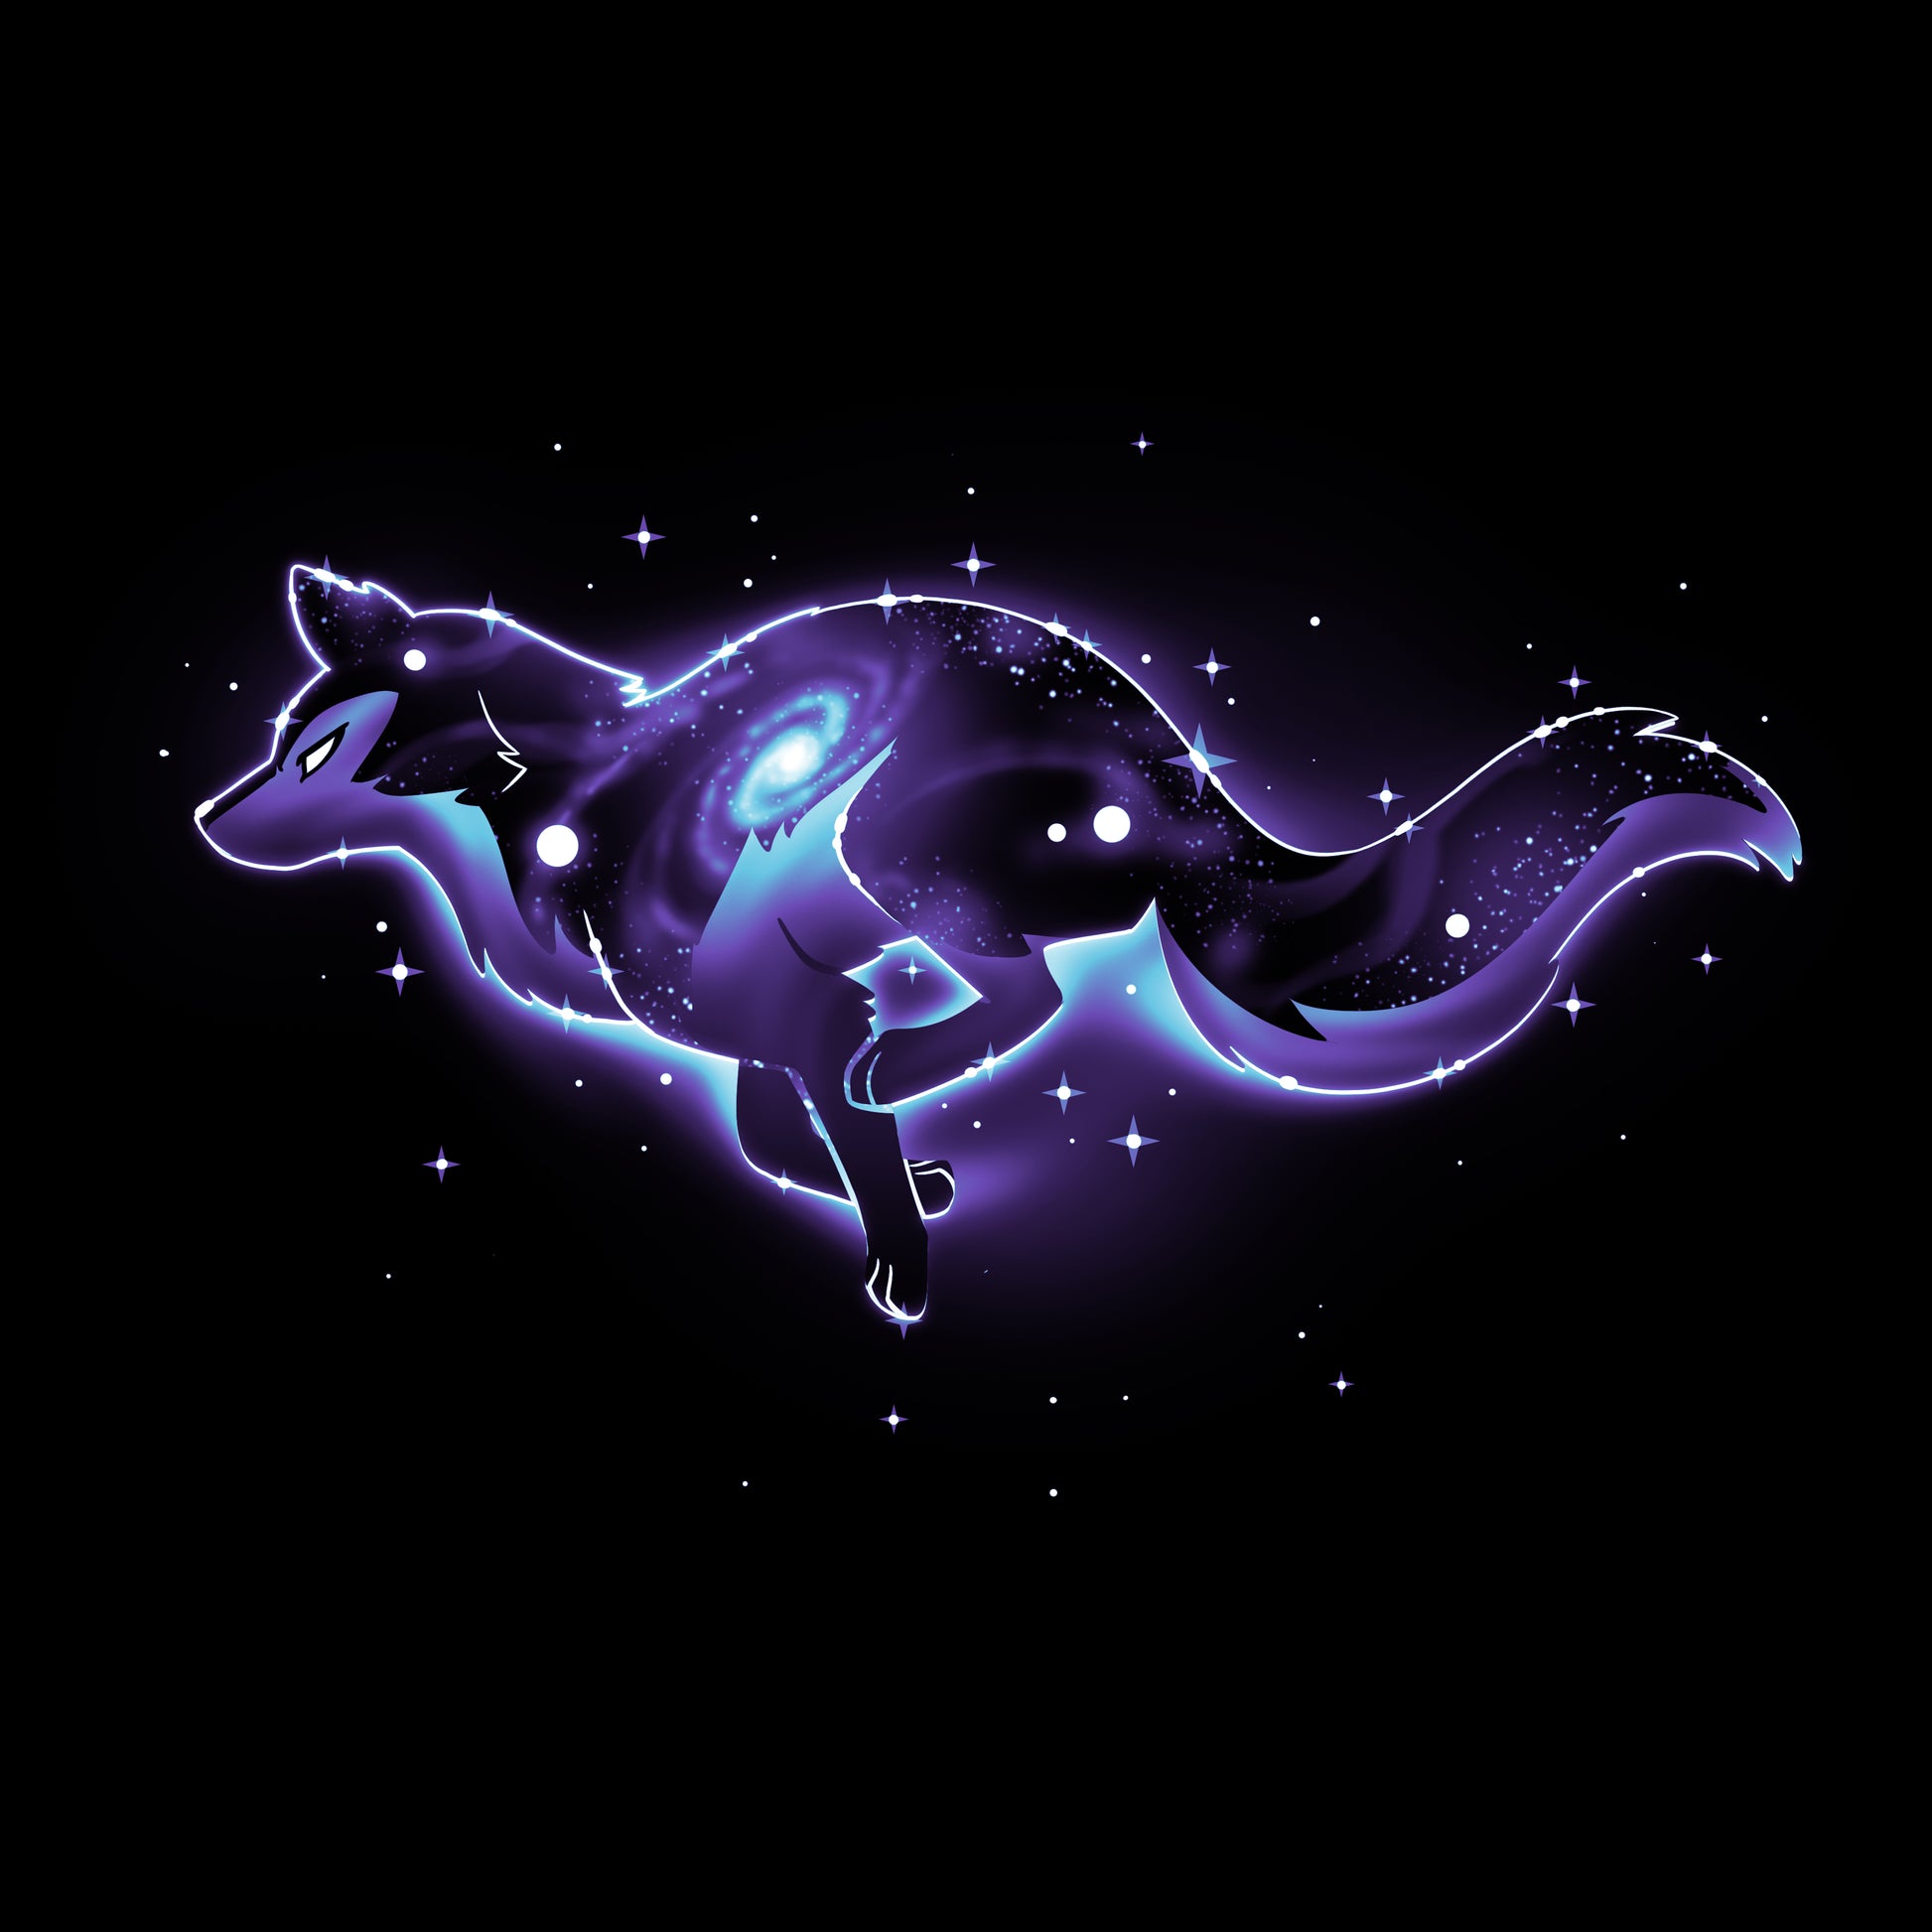 An image of a fox in space with stars in the background, perfect for a Lupine Constellation T-shirt by TeeTurtle.